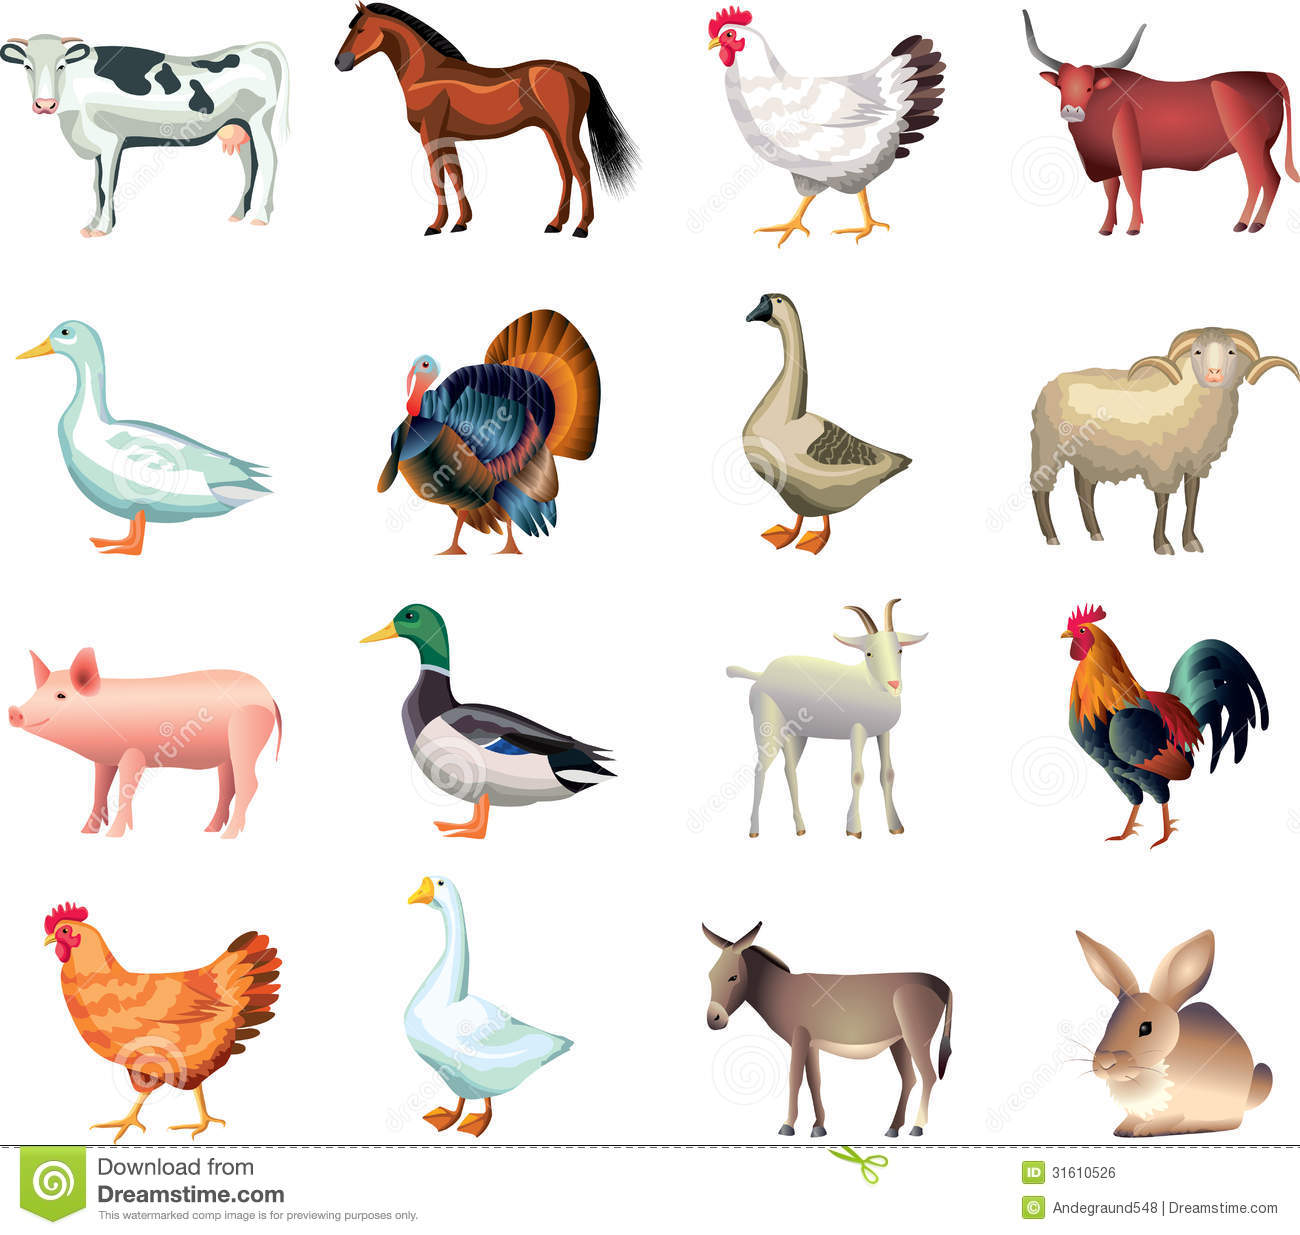 clipart animals realistic - Clipground